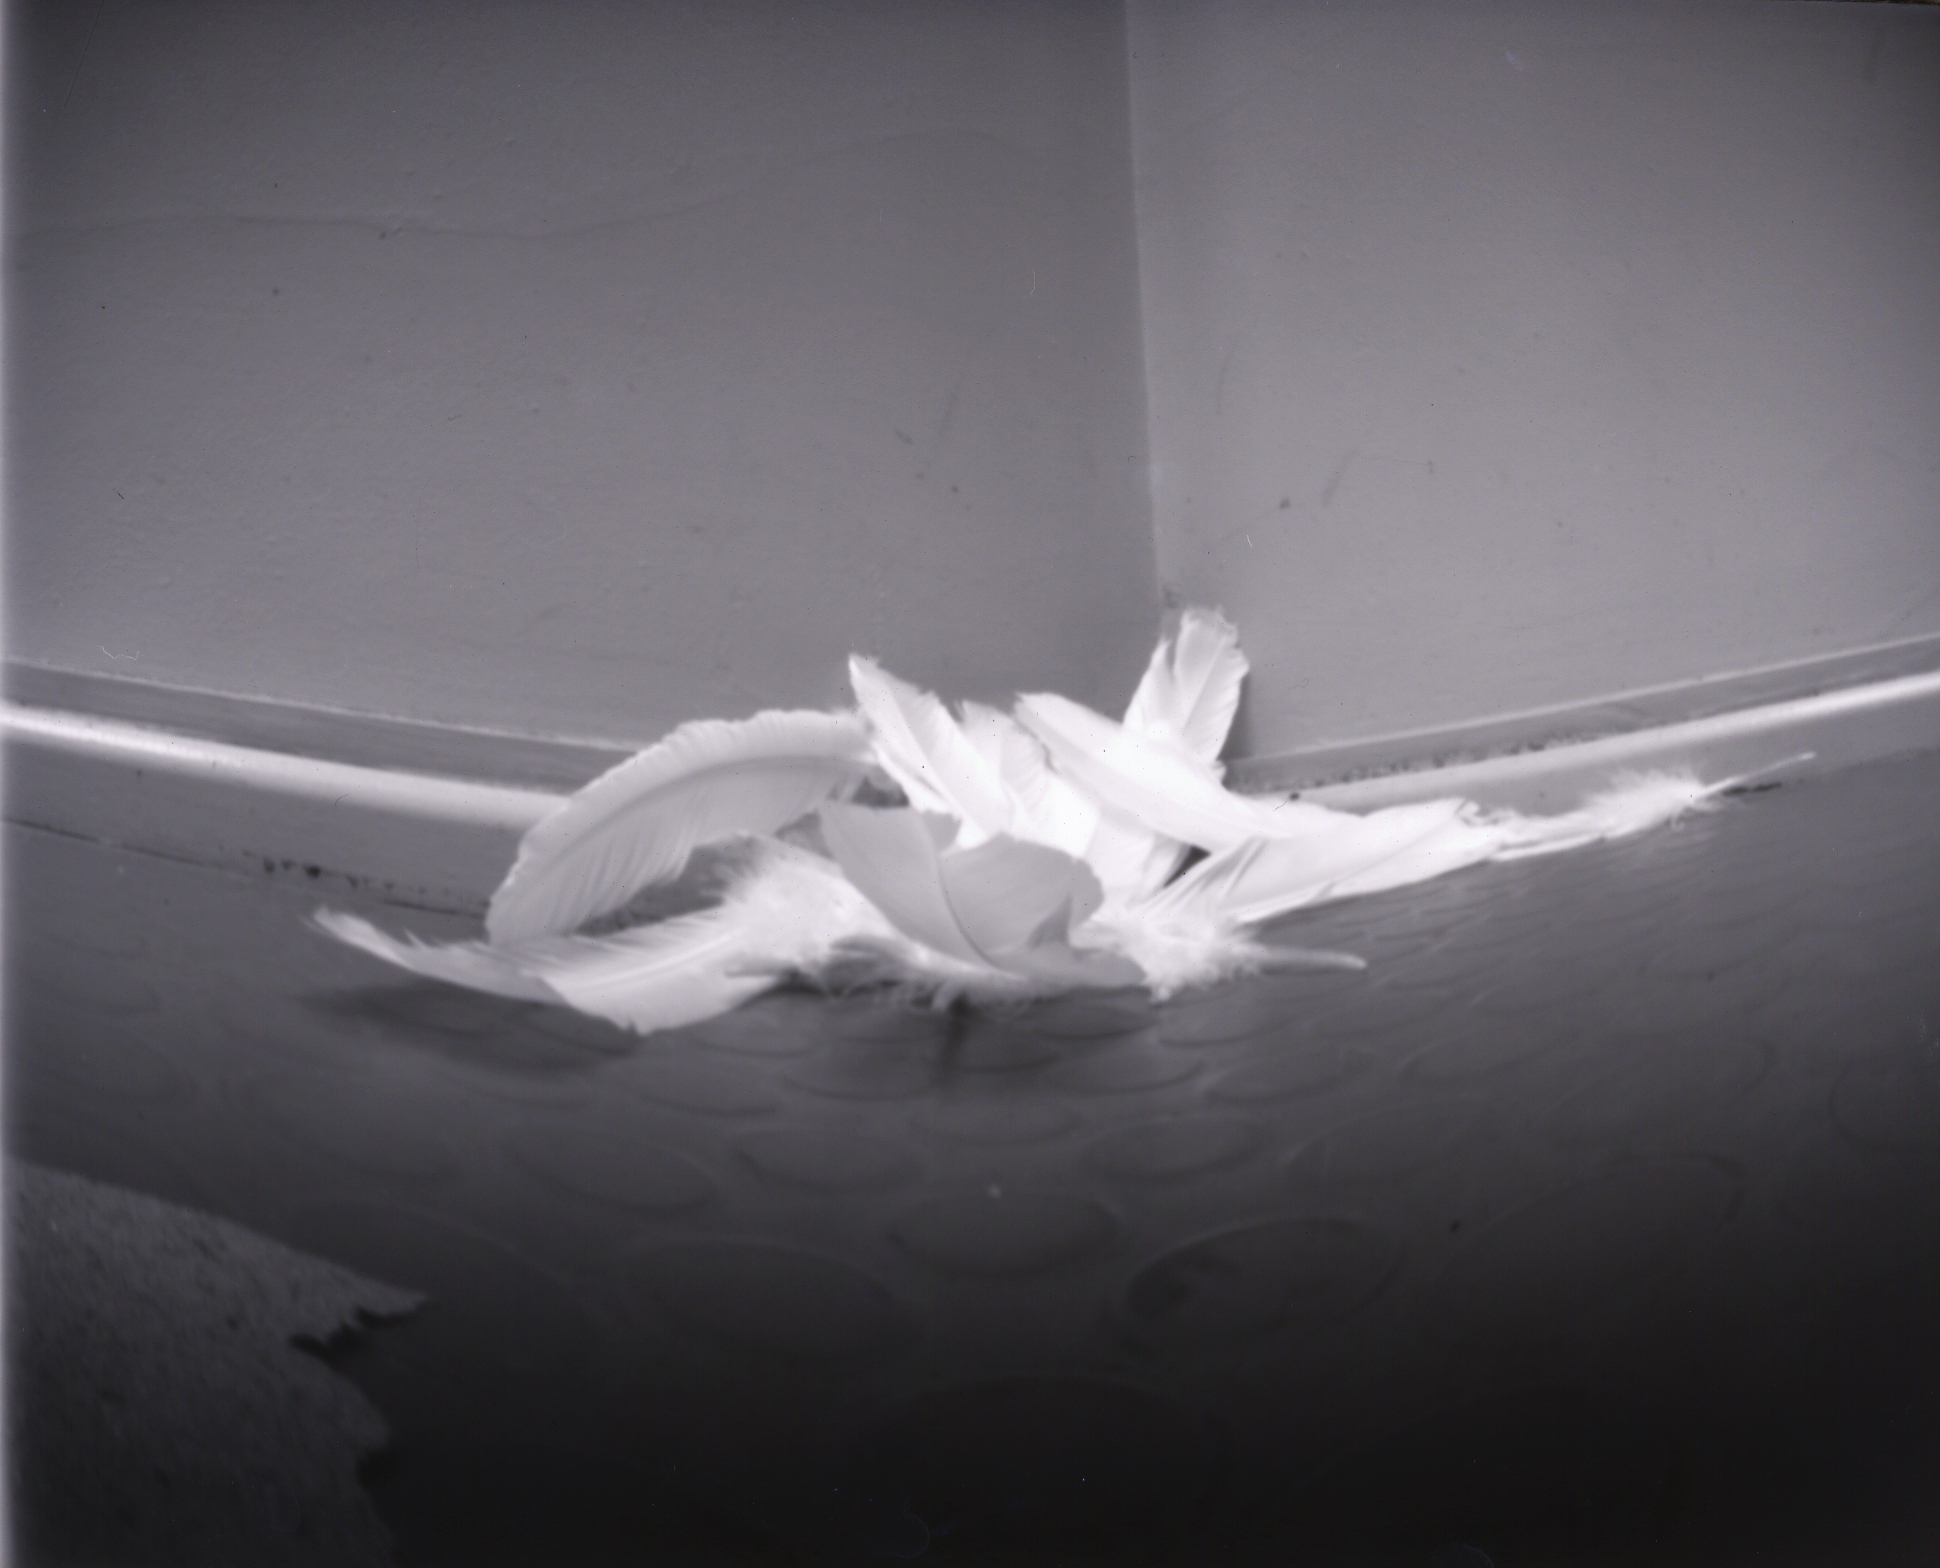 a black and white pinhole camera photograph with a curvature distortion around the edges;  on a rubber floor with raised circles, in a corner, approximately ten white feathers are strewn in a loose group; the walls are grey, there is a small bead of trim between the wall and the floor